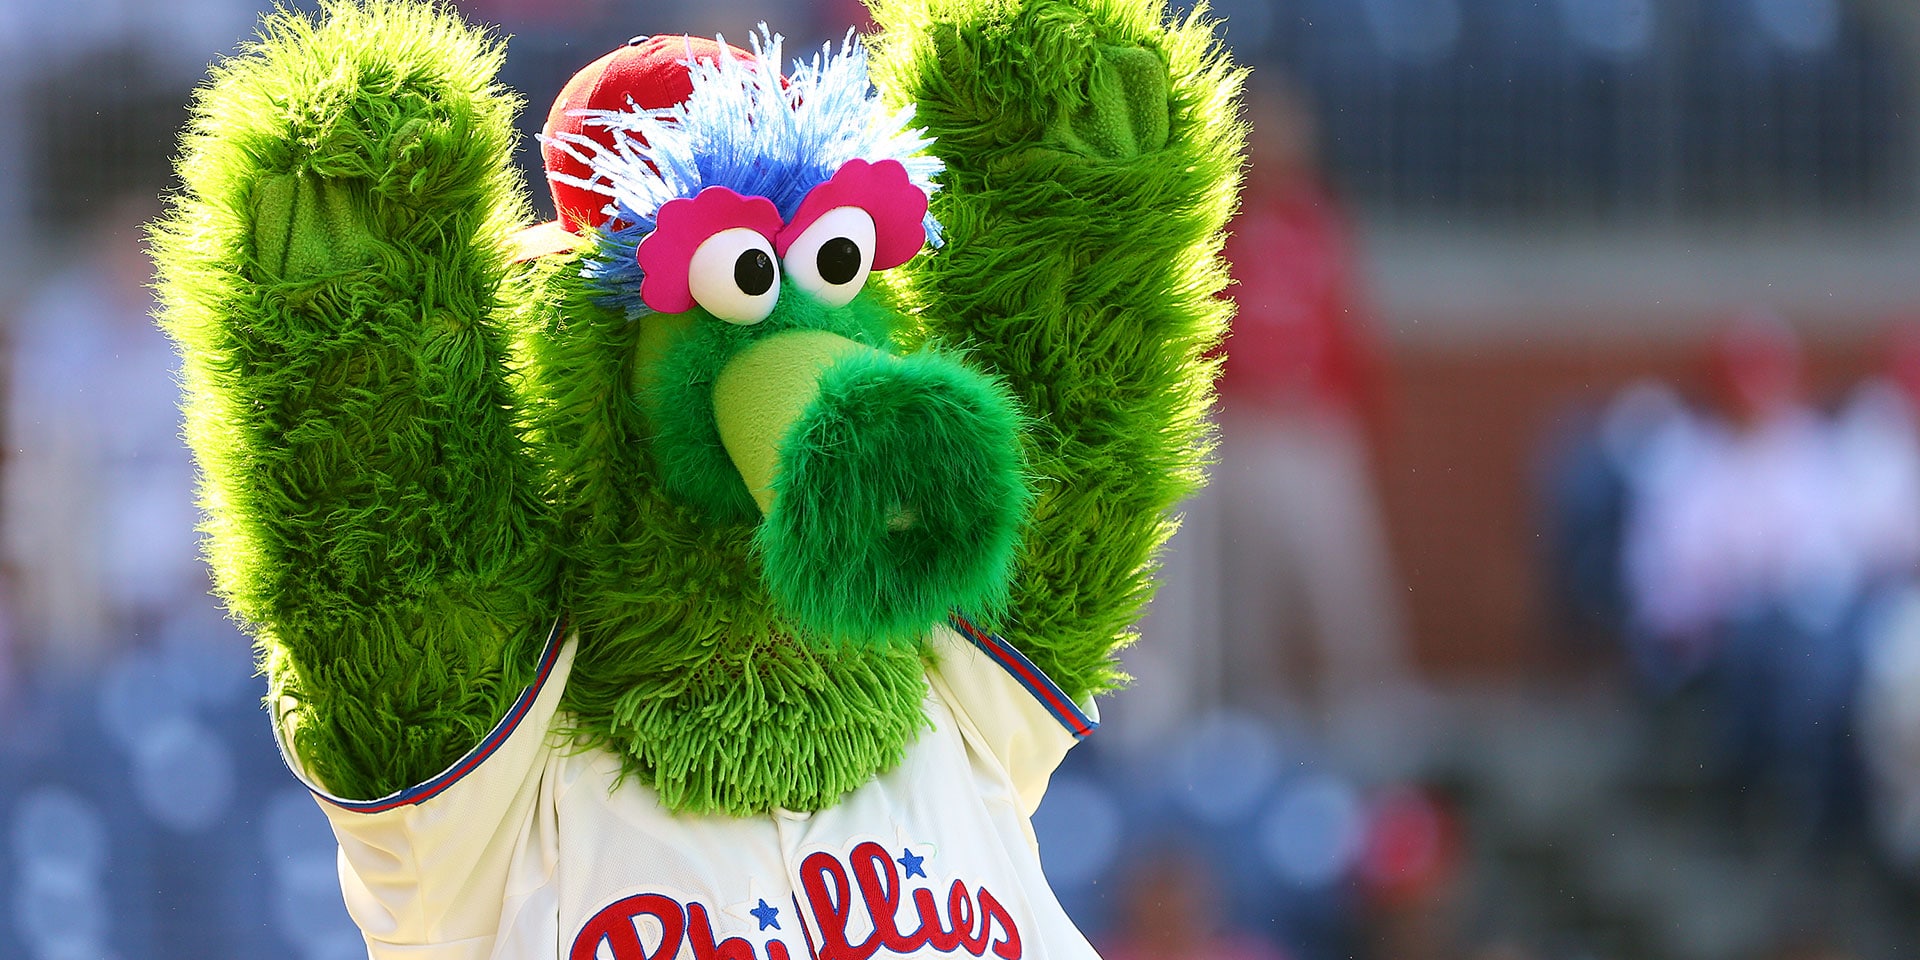 Phillies fan injured after Phillie Phanatic's flying hot dog hit